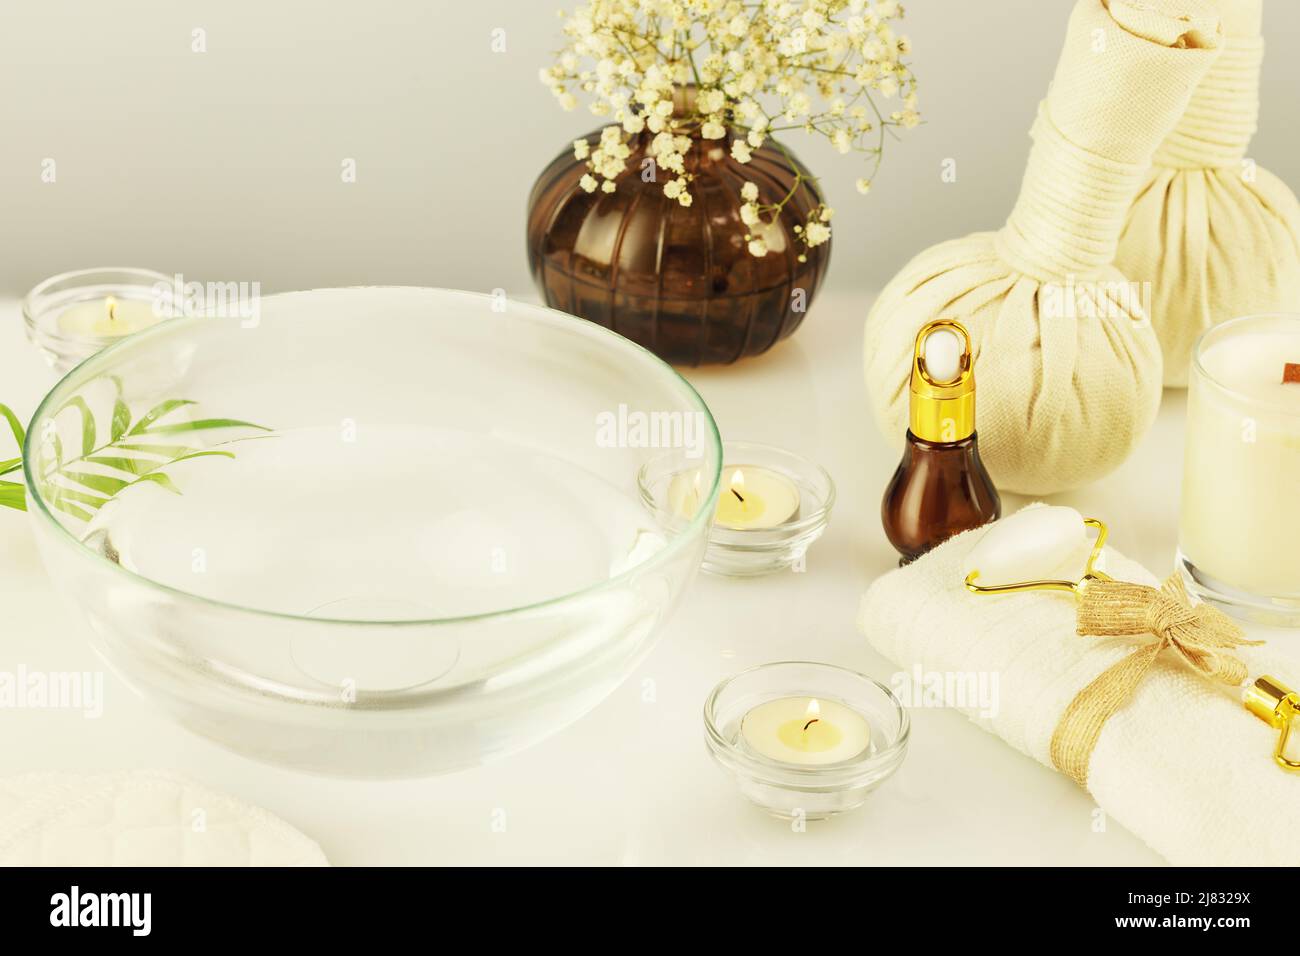 Beauty salon life stile with cosmetology products, spa accessories and candles. Spa relax composition. Preparing for facial care procedure. Concept of Stock Photo